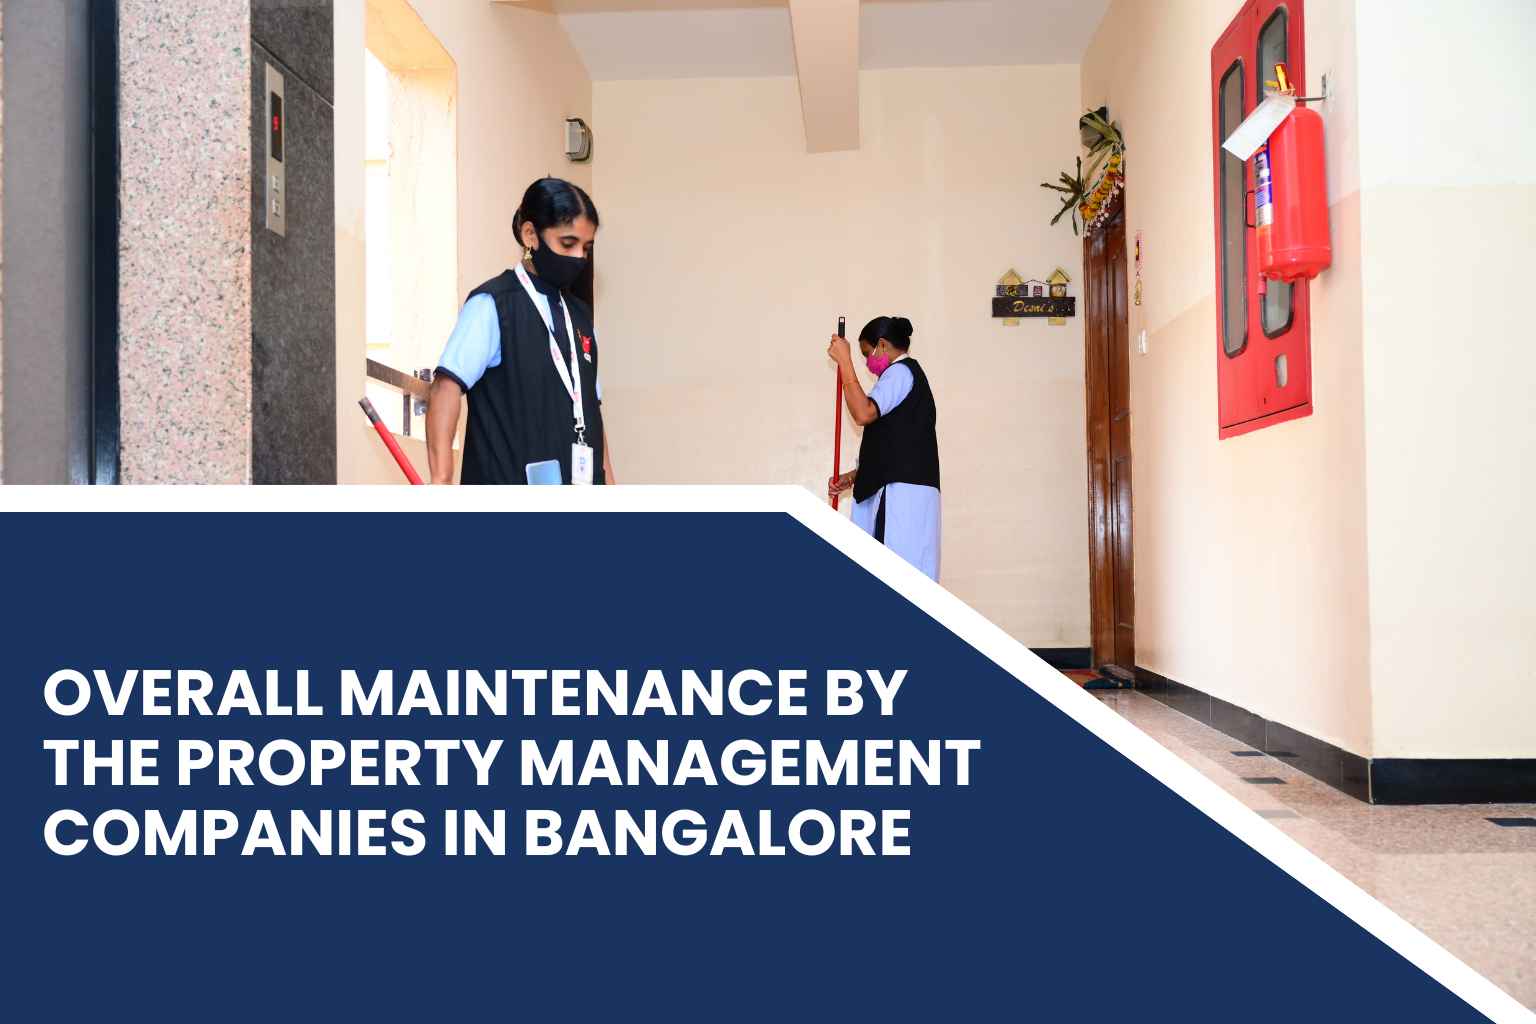 Overall Maintenance By The Property Management Companies In Bangalore